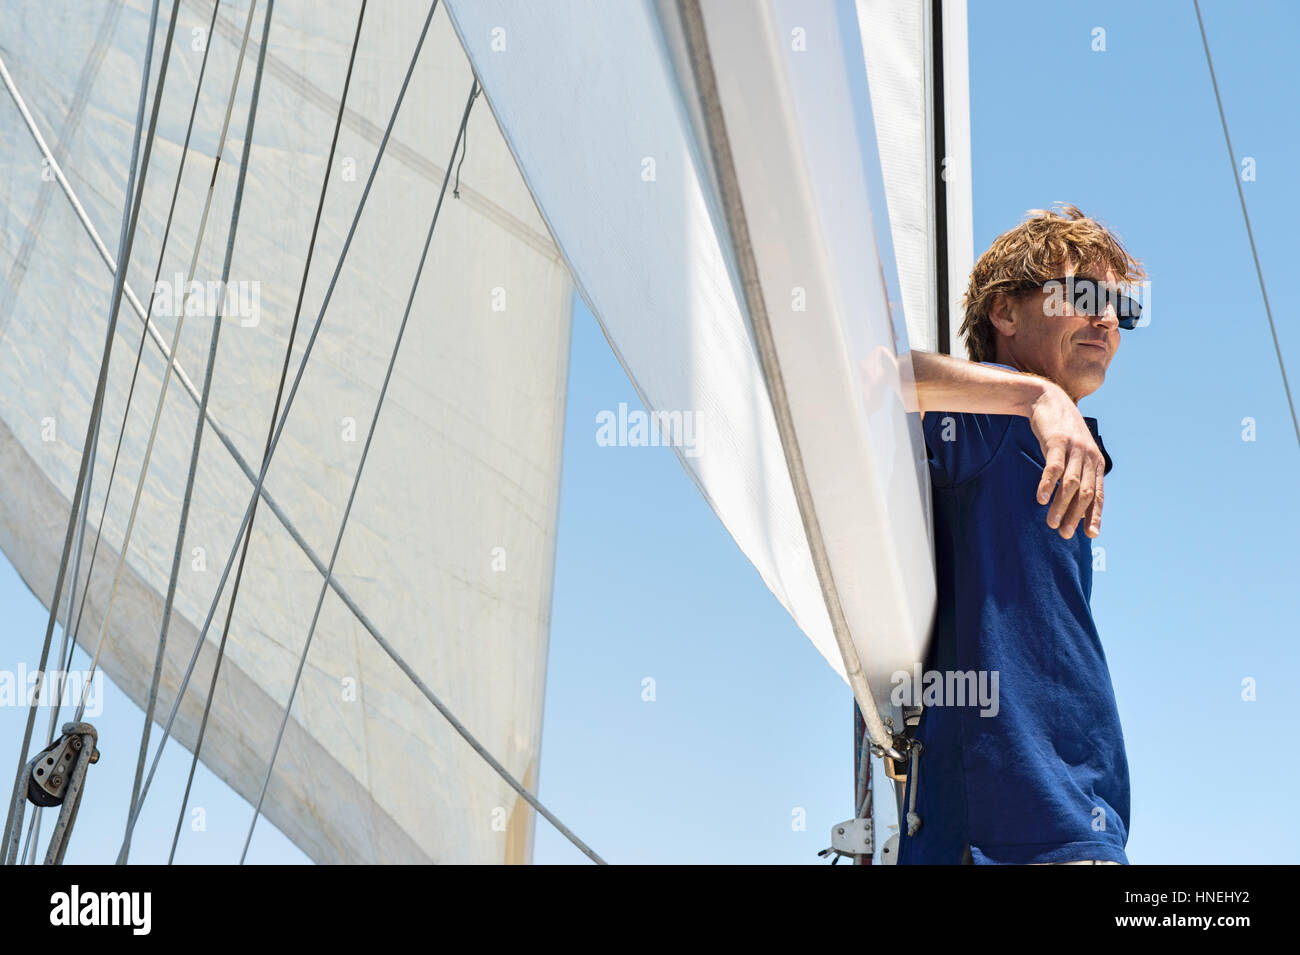 Side view of middle-aged man on yacht Stock Photo